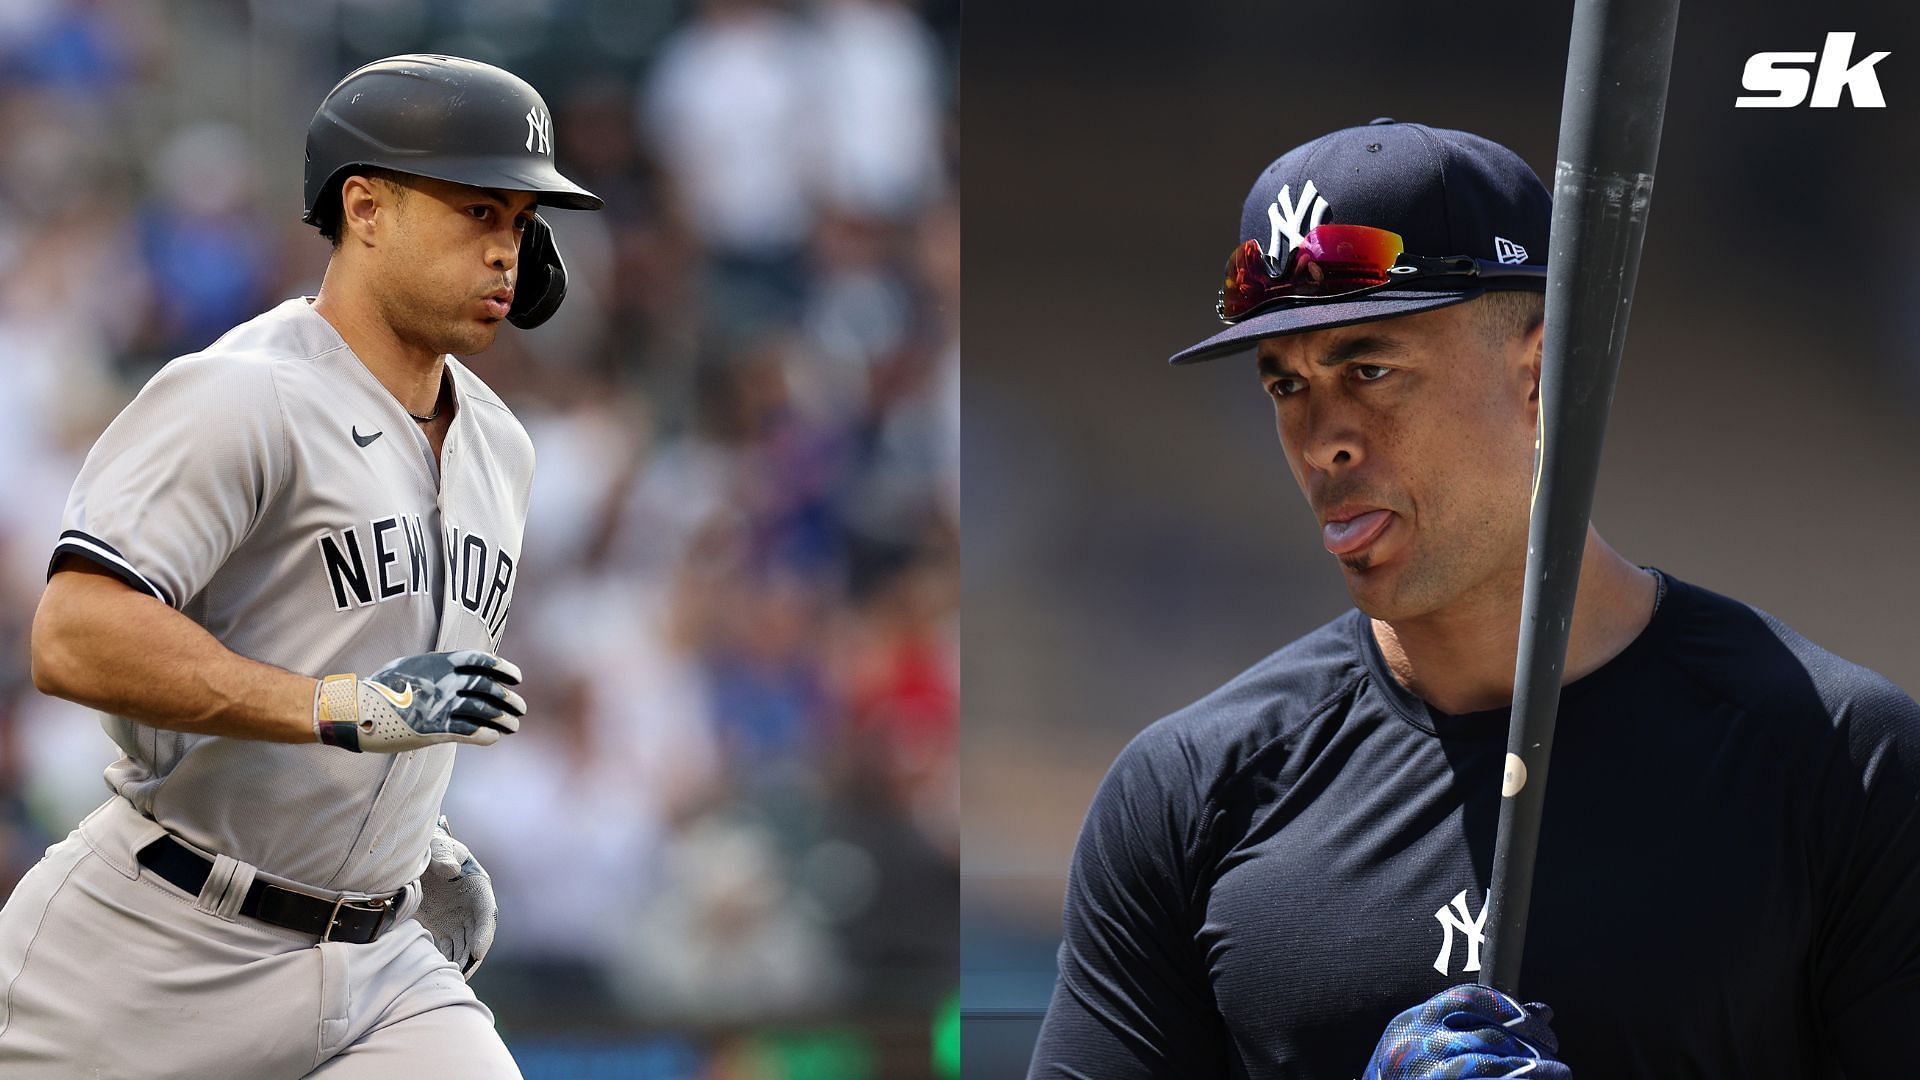 Giancarlo Stanton's slump and 4 most concerning Yankees trends